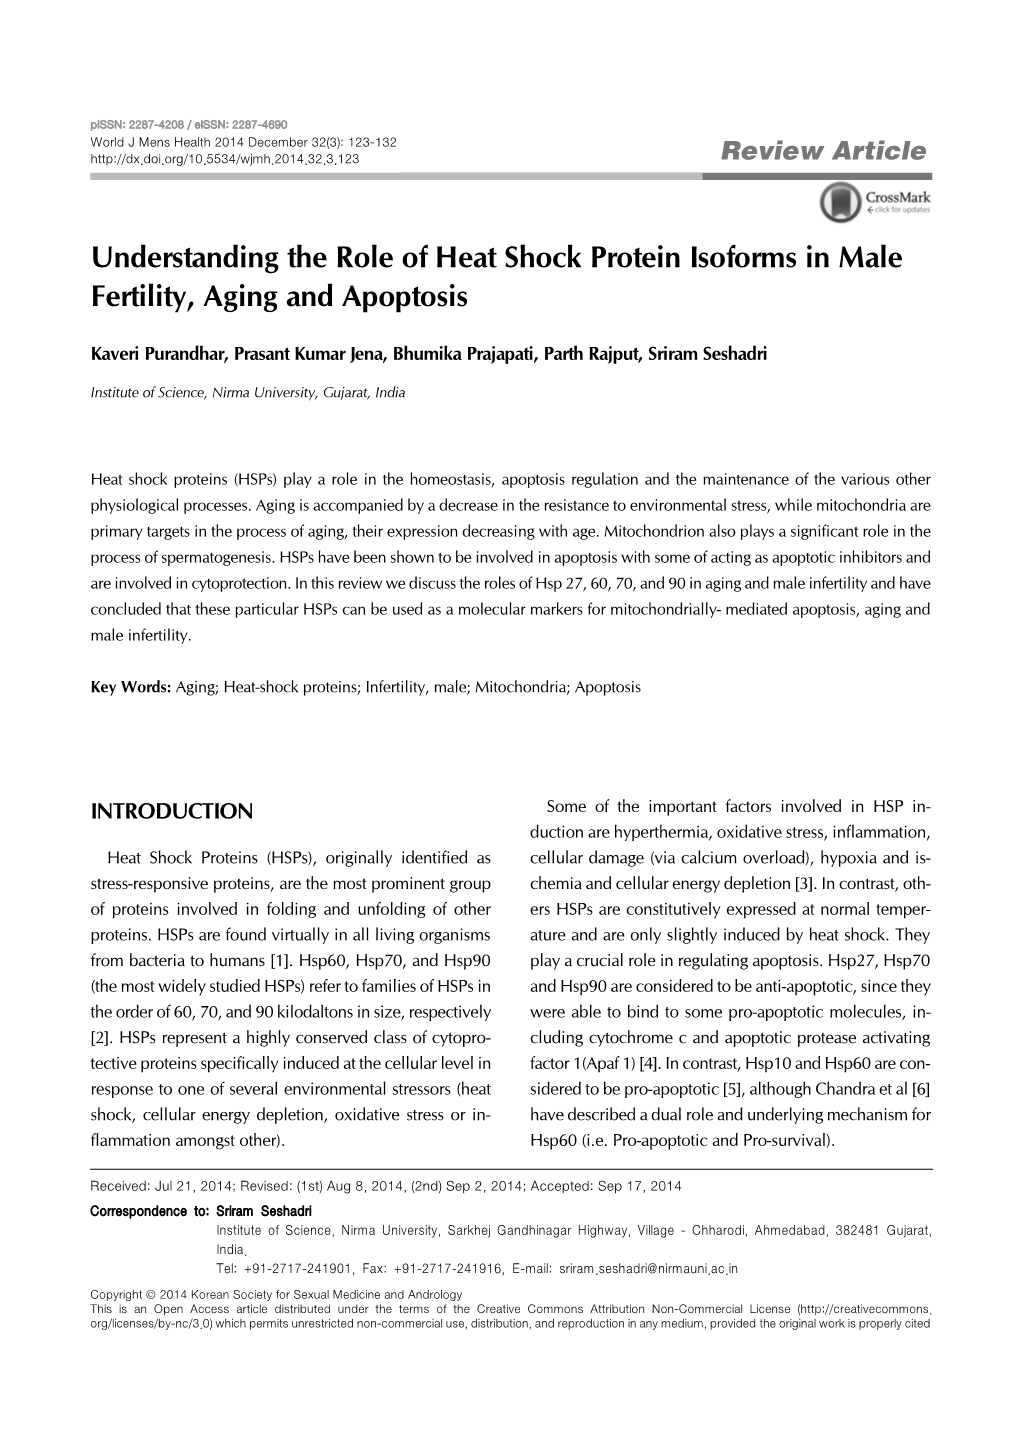 Understanding the Role of Heat Shock Protein Isoforms in Male Fertility, Aging and Apoptosis